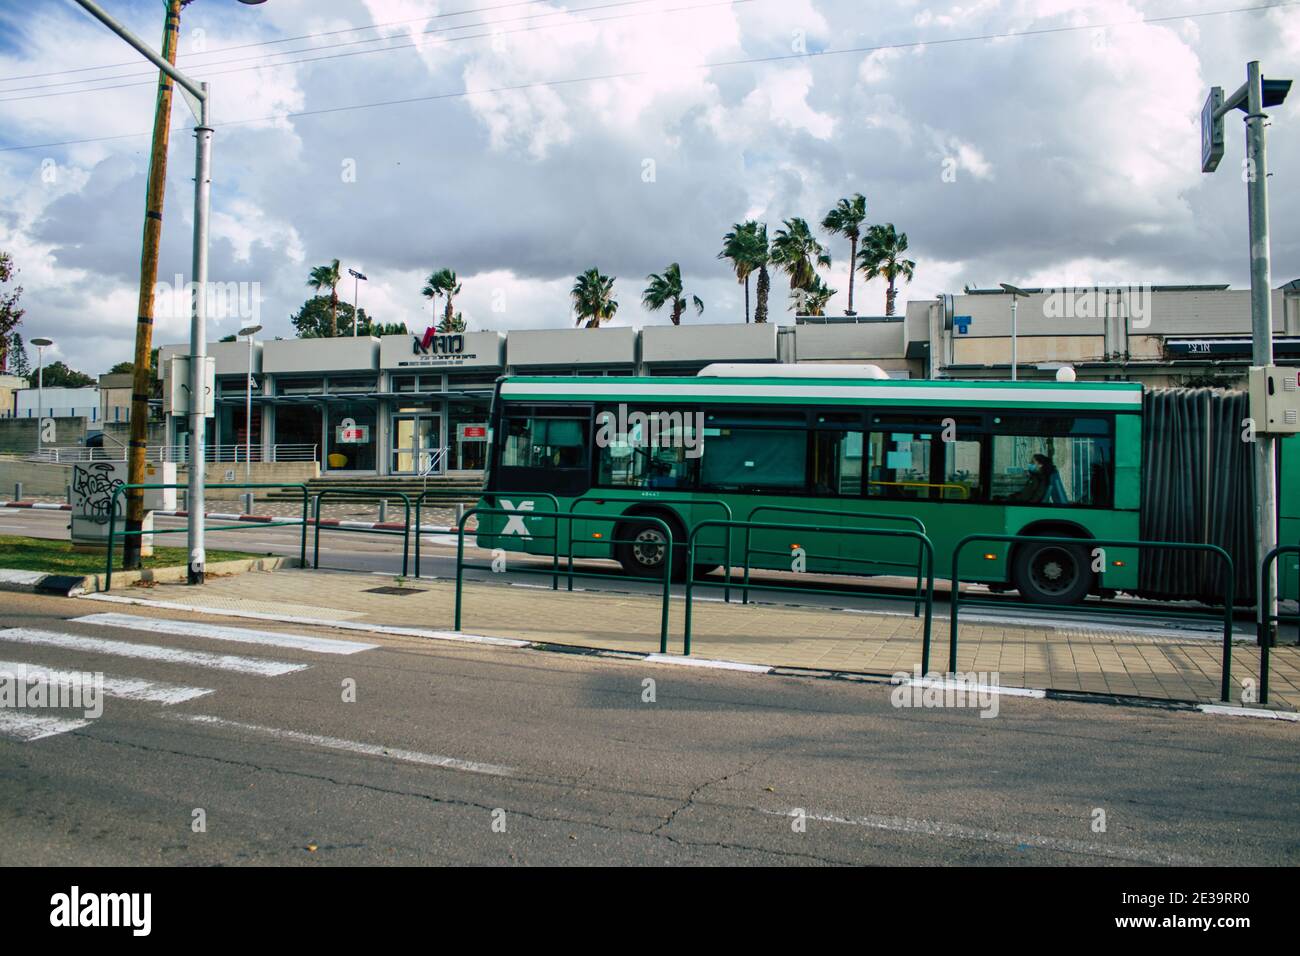 Tel Aviv Israel January 17 21 View Of An Israeli Public Bus Driving Through The Streets Of Tel Aviv During The Lockdown And Coronavirus Outbreak In Stock Photo Alamy